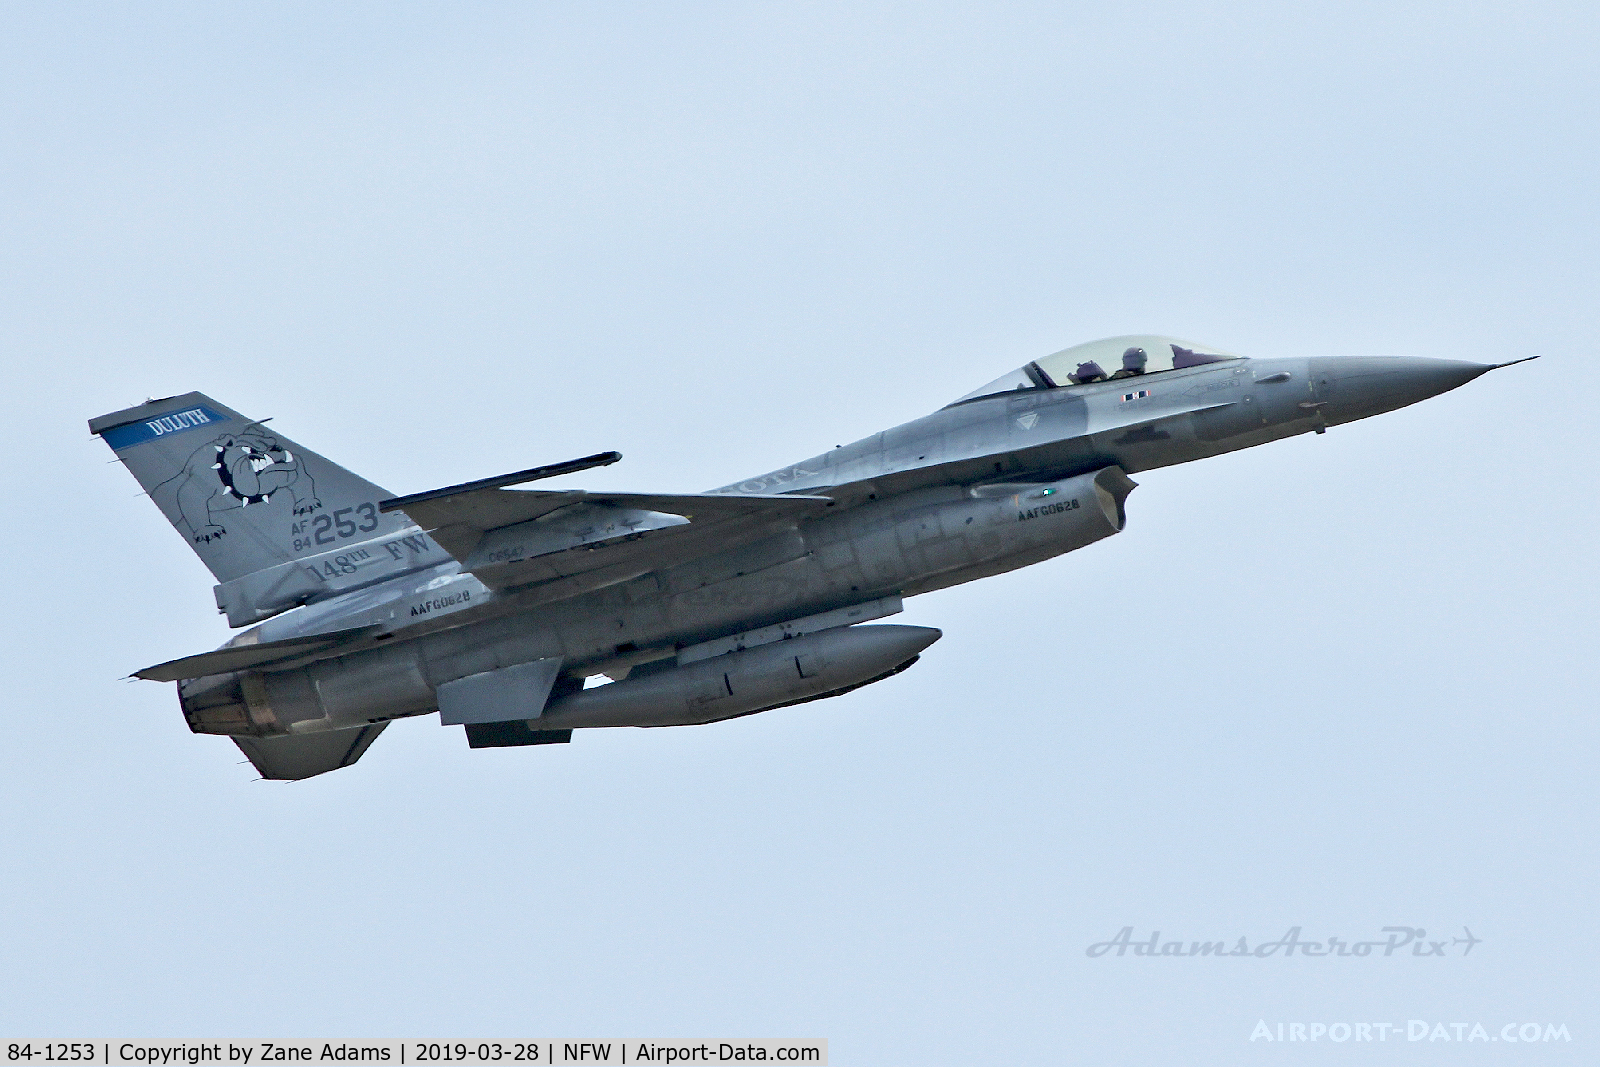 84-1253, 1984 General Dynamics F-16C Fighting Falcon C/N 5C-90, Departing NAS JRB Fort Worth - To target drone mod